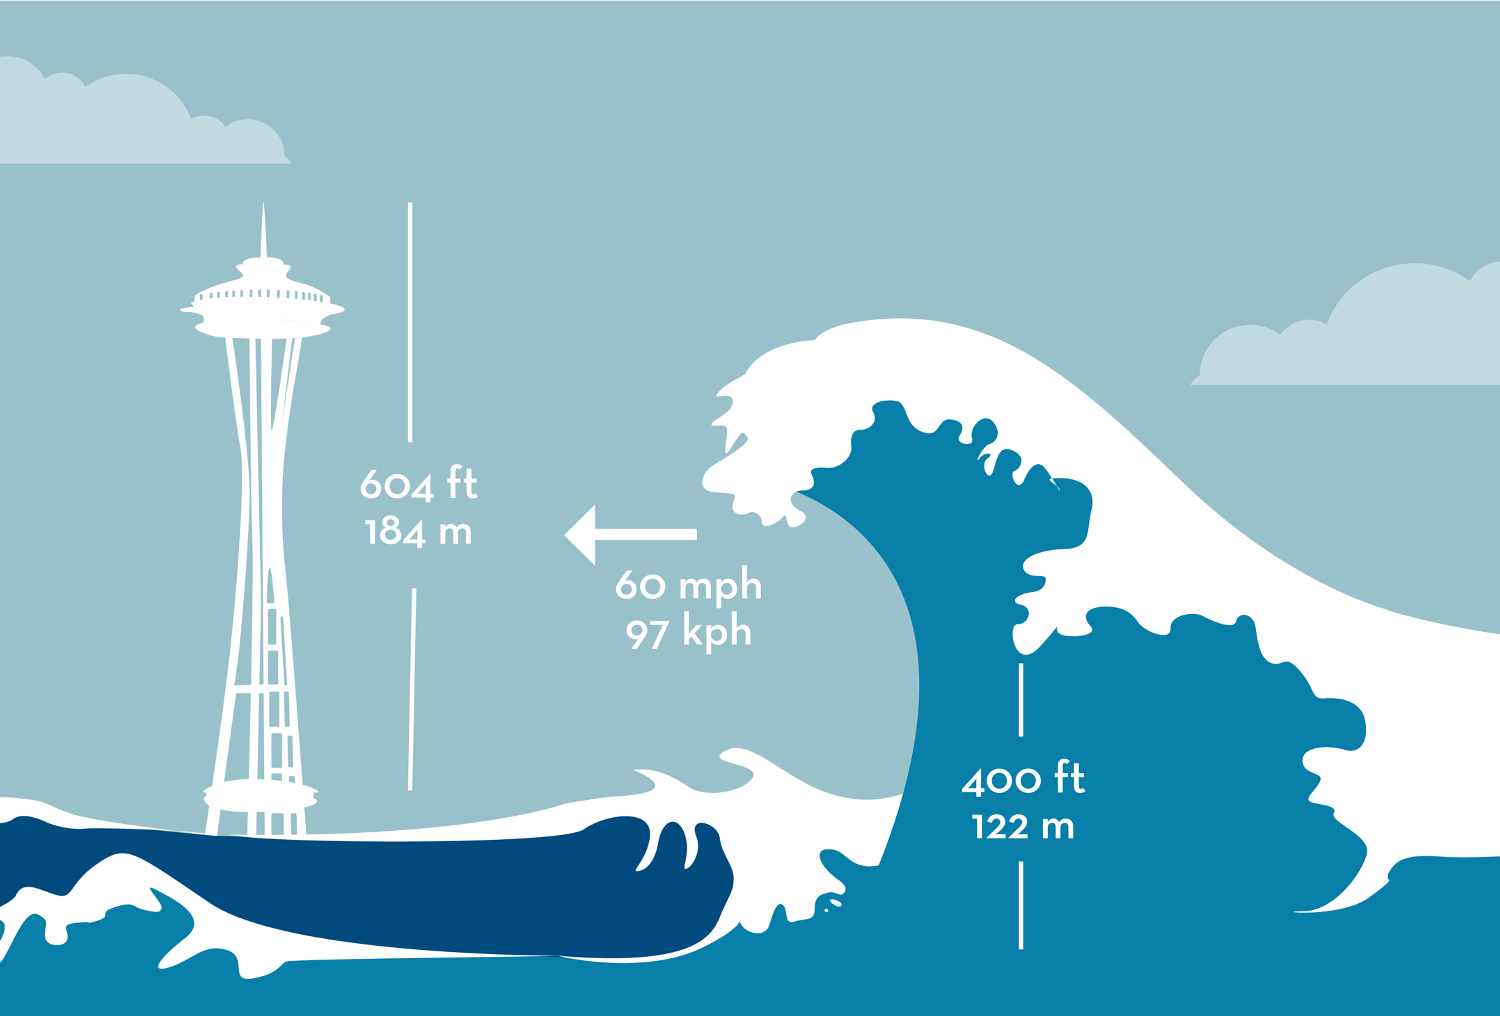 Illustration of the estimated height of the water from the Missoula Floods comparatively to the Space Needle.